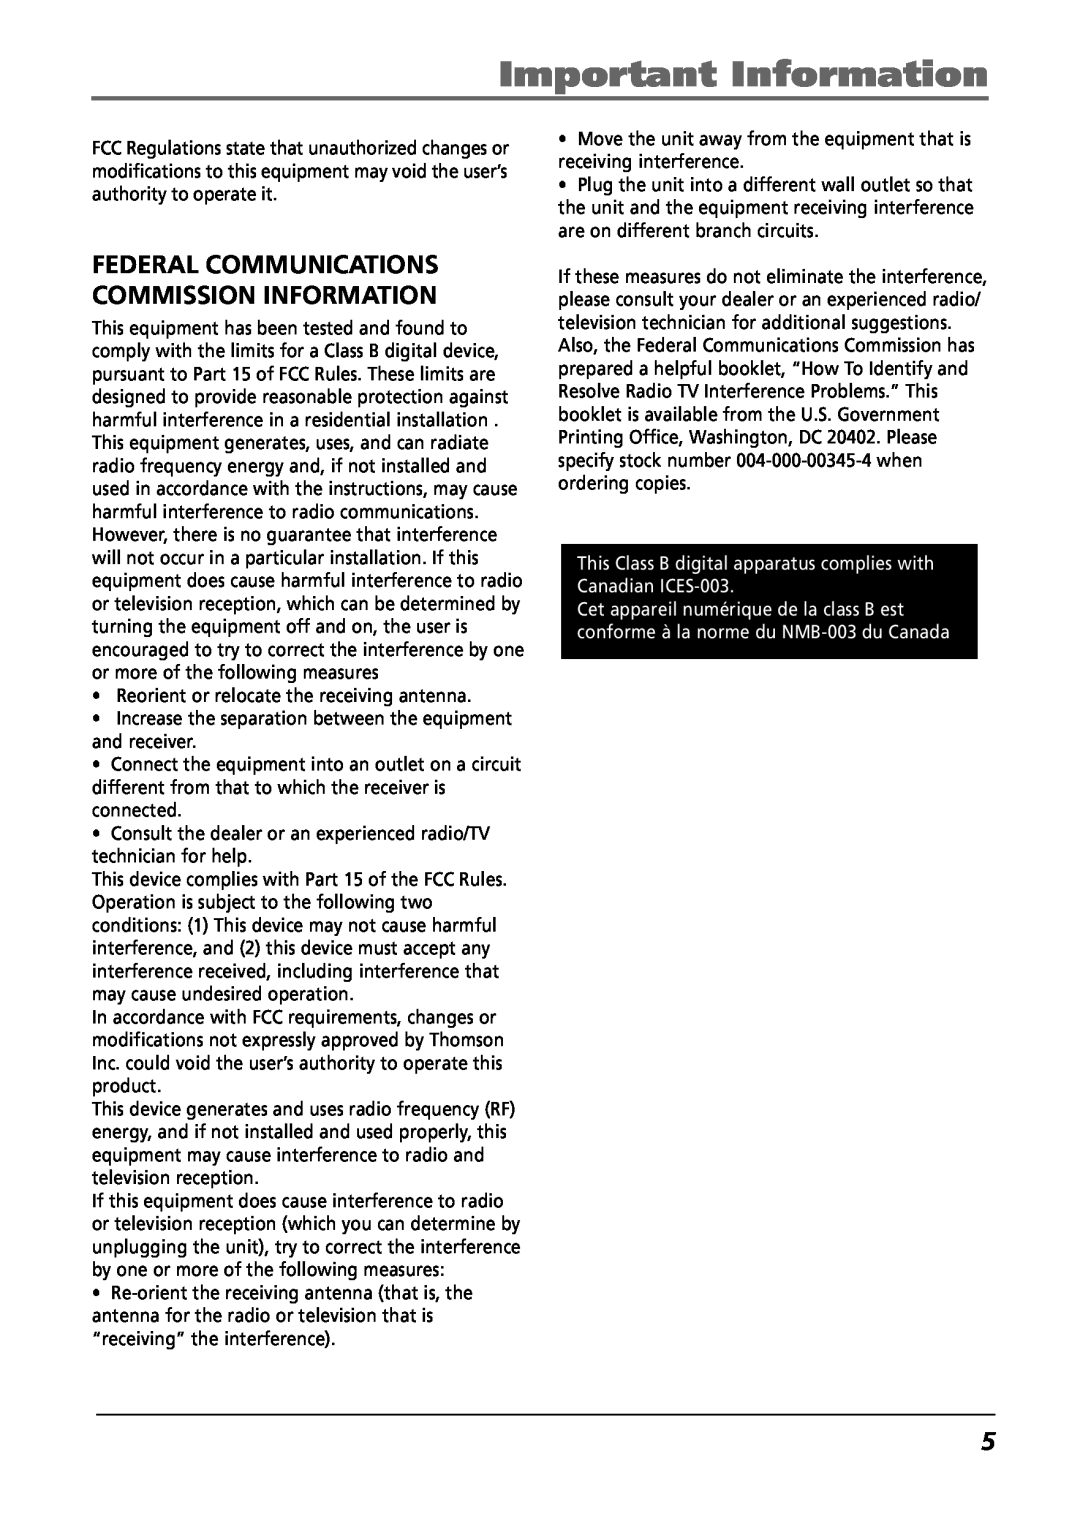 RCA H115/H125 manual Federal Communications Commission Information, Important Information 